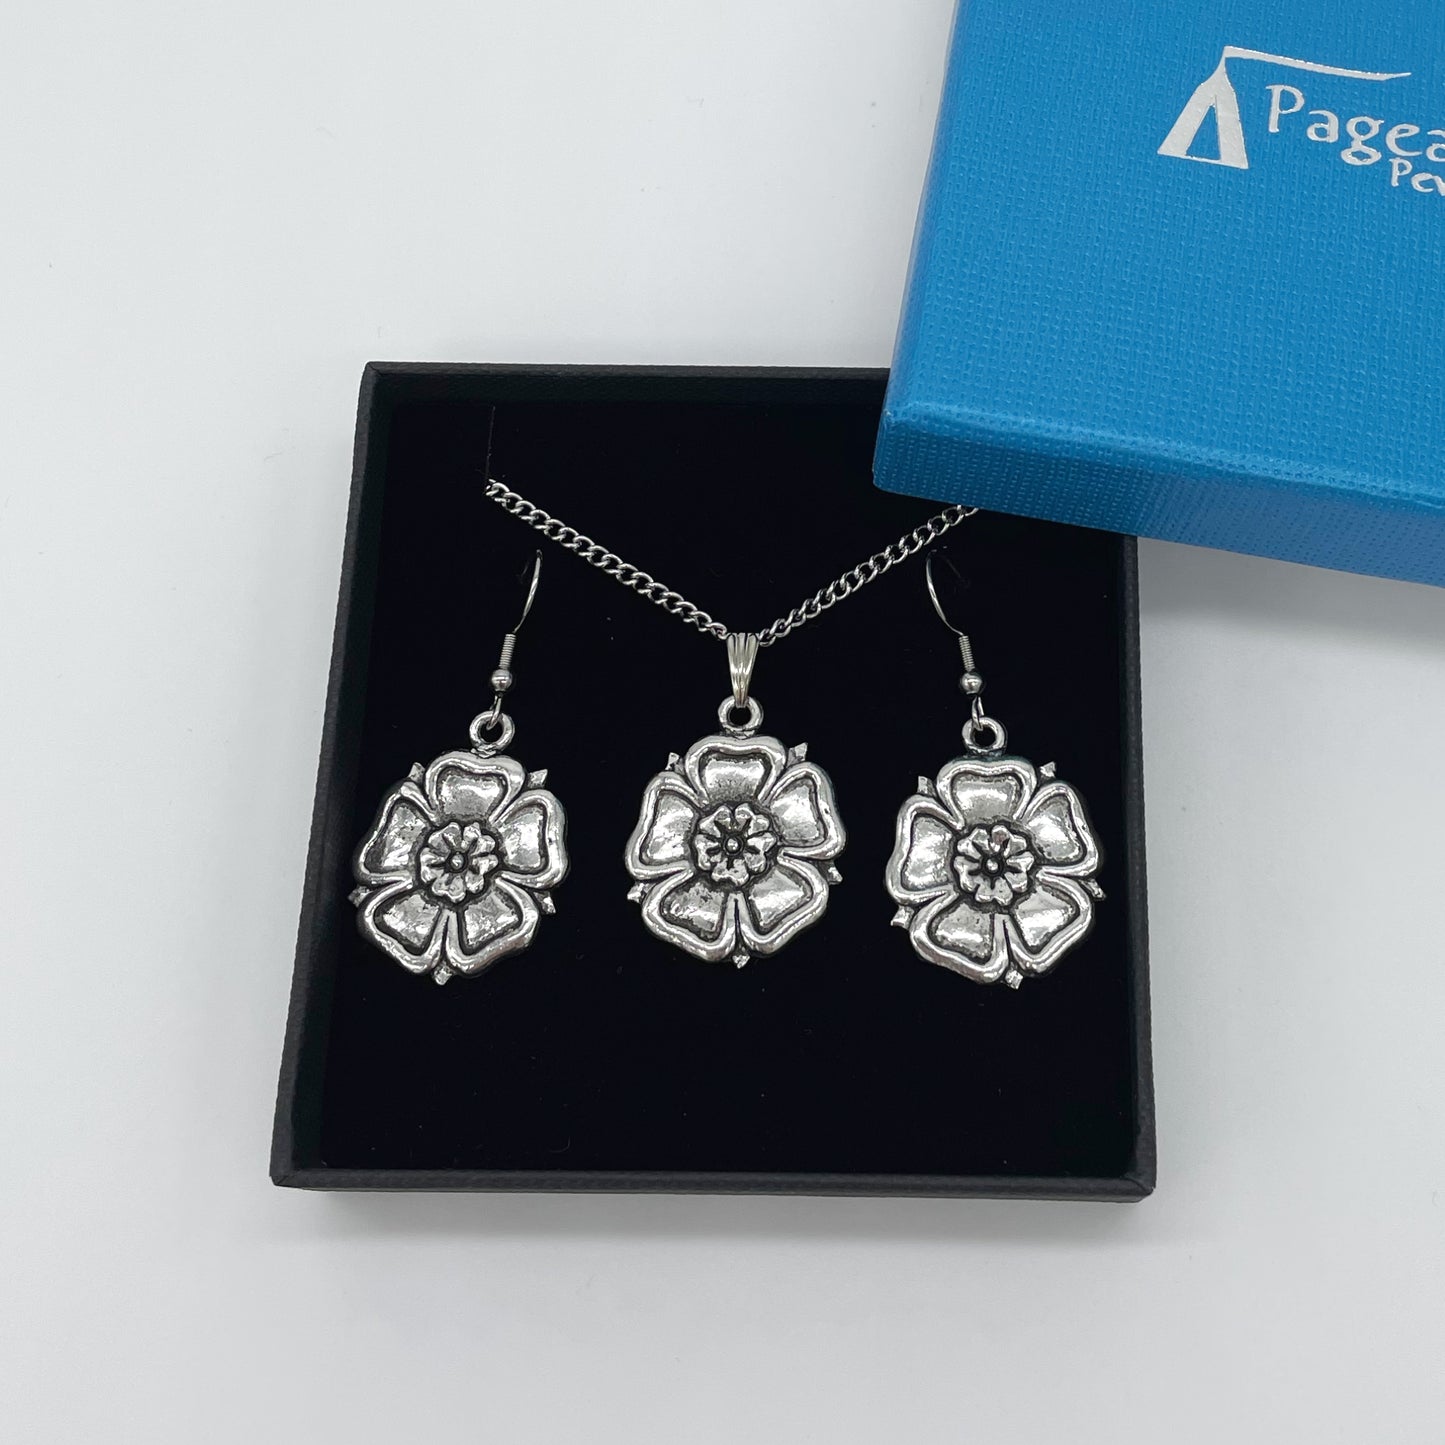 Yorkshire Rose Pewter Pendant & Earrings Gift Set - The Great Yorkshire Shop